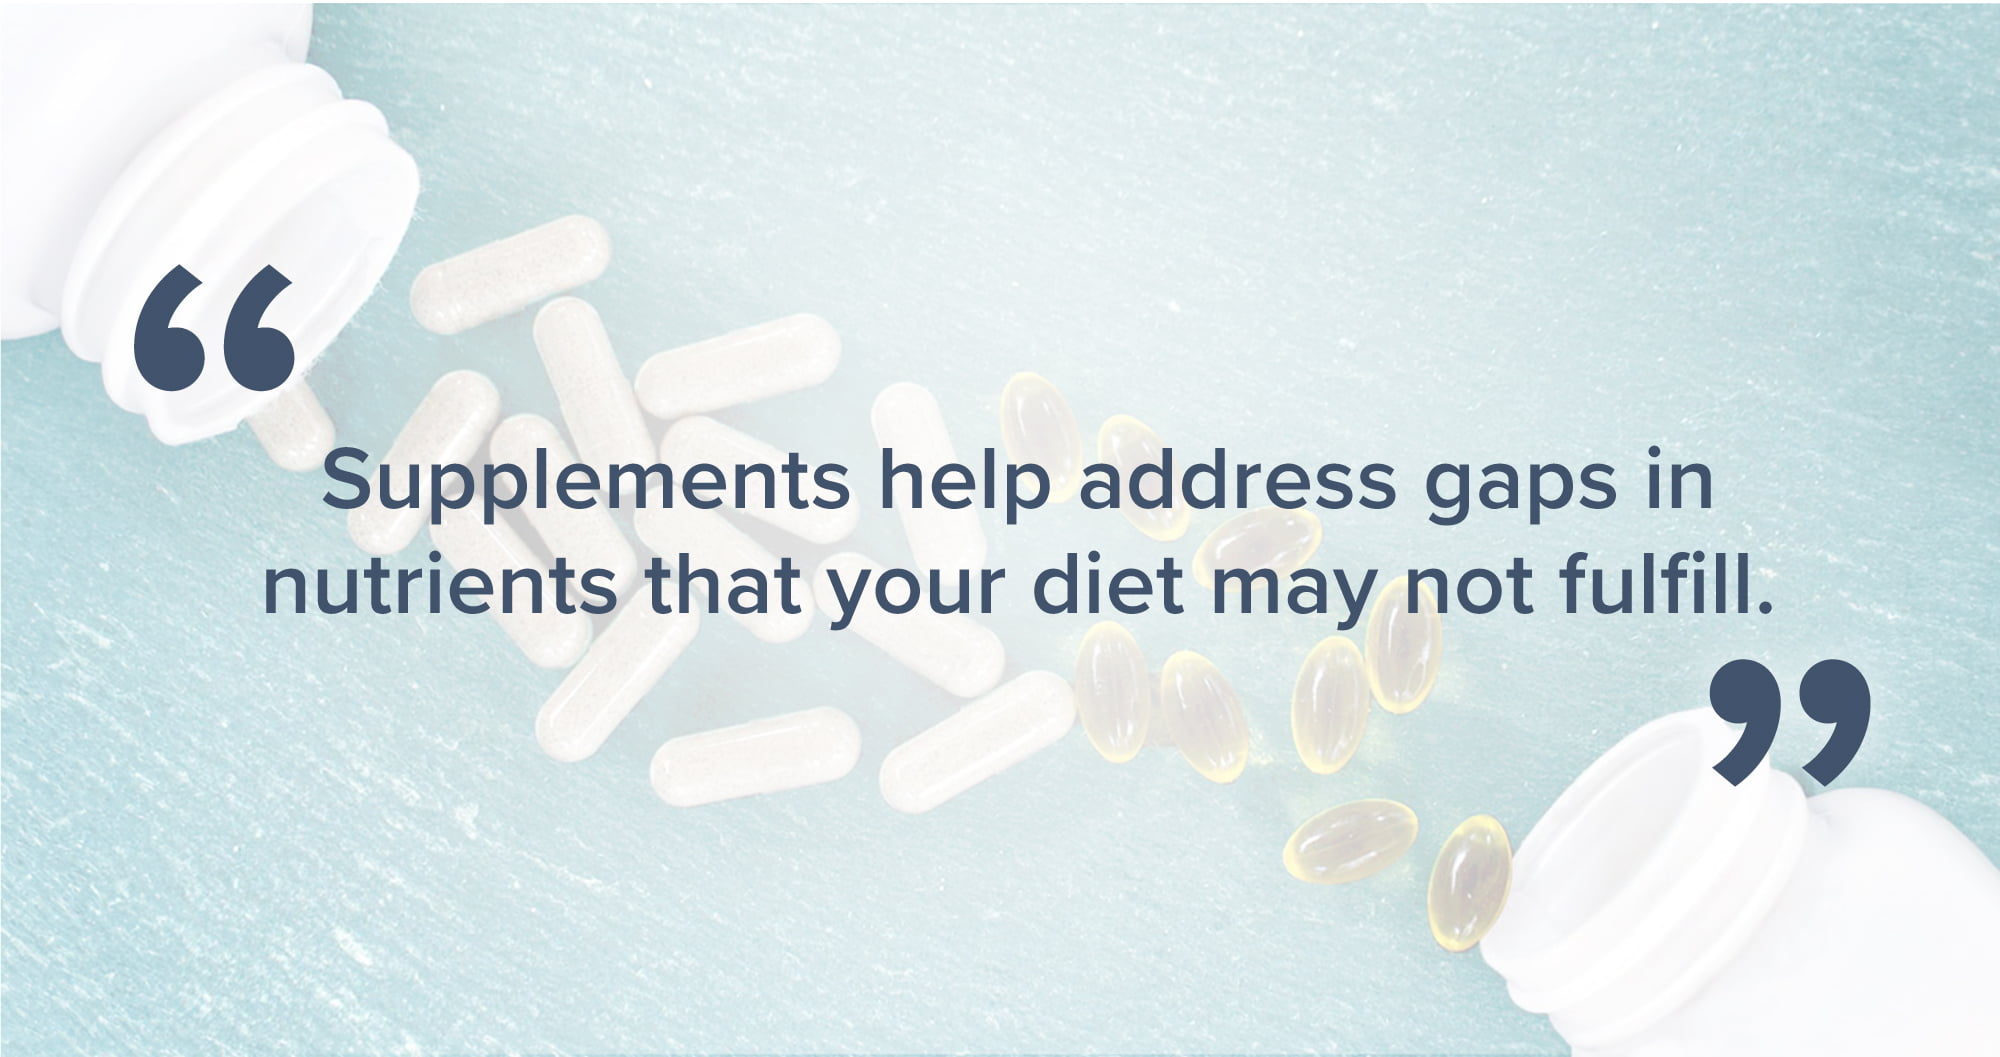 An image showcasing small bottles of dietary supplements with a quote in the foreground: "Supplements help address gaps in nutrients that your diet may not fulfill."